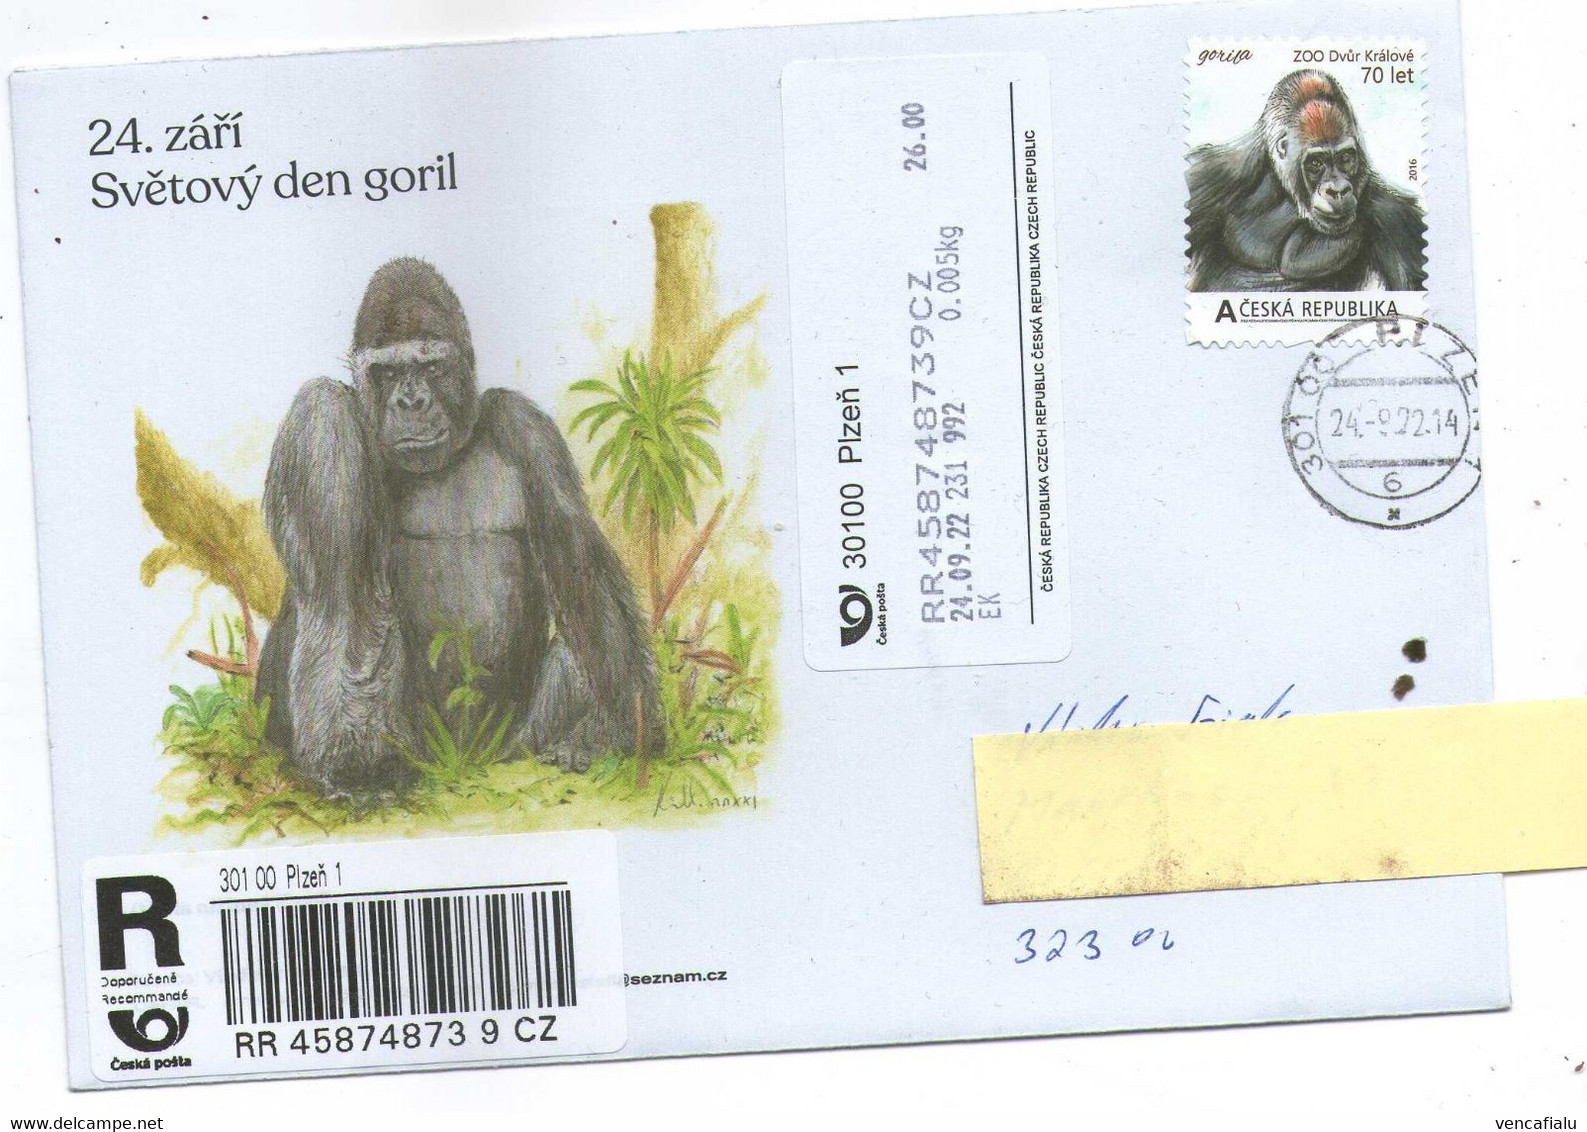 Czech Republic 2022 - World Day Gorillas, Nice Cover, My Stamp, Apost, Postage Registered Used - Gorillas